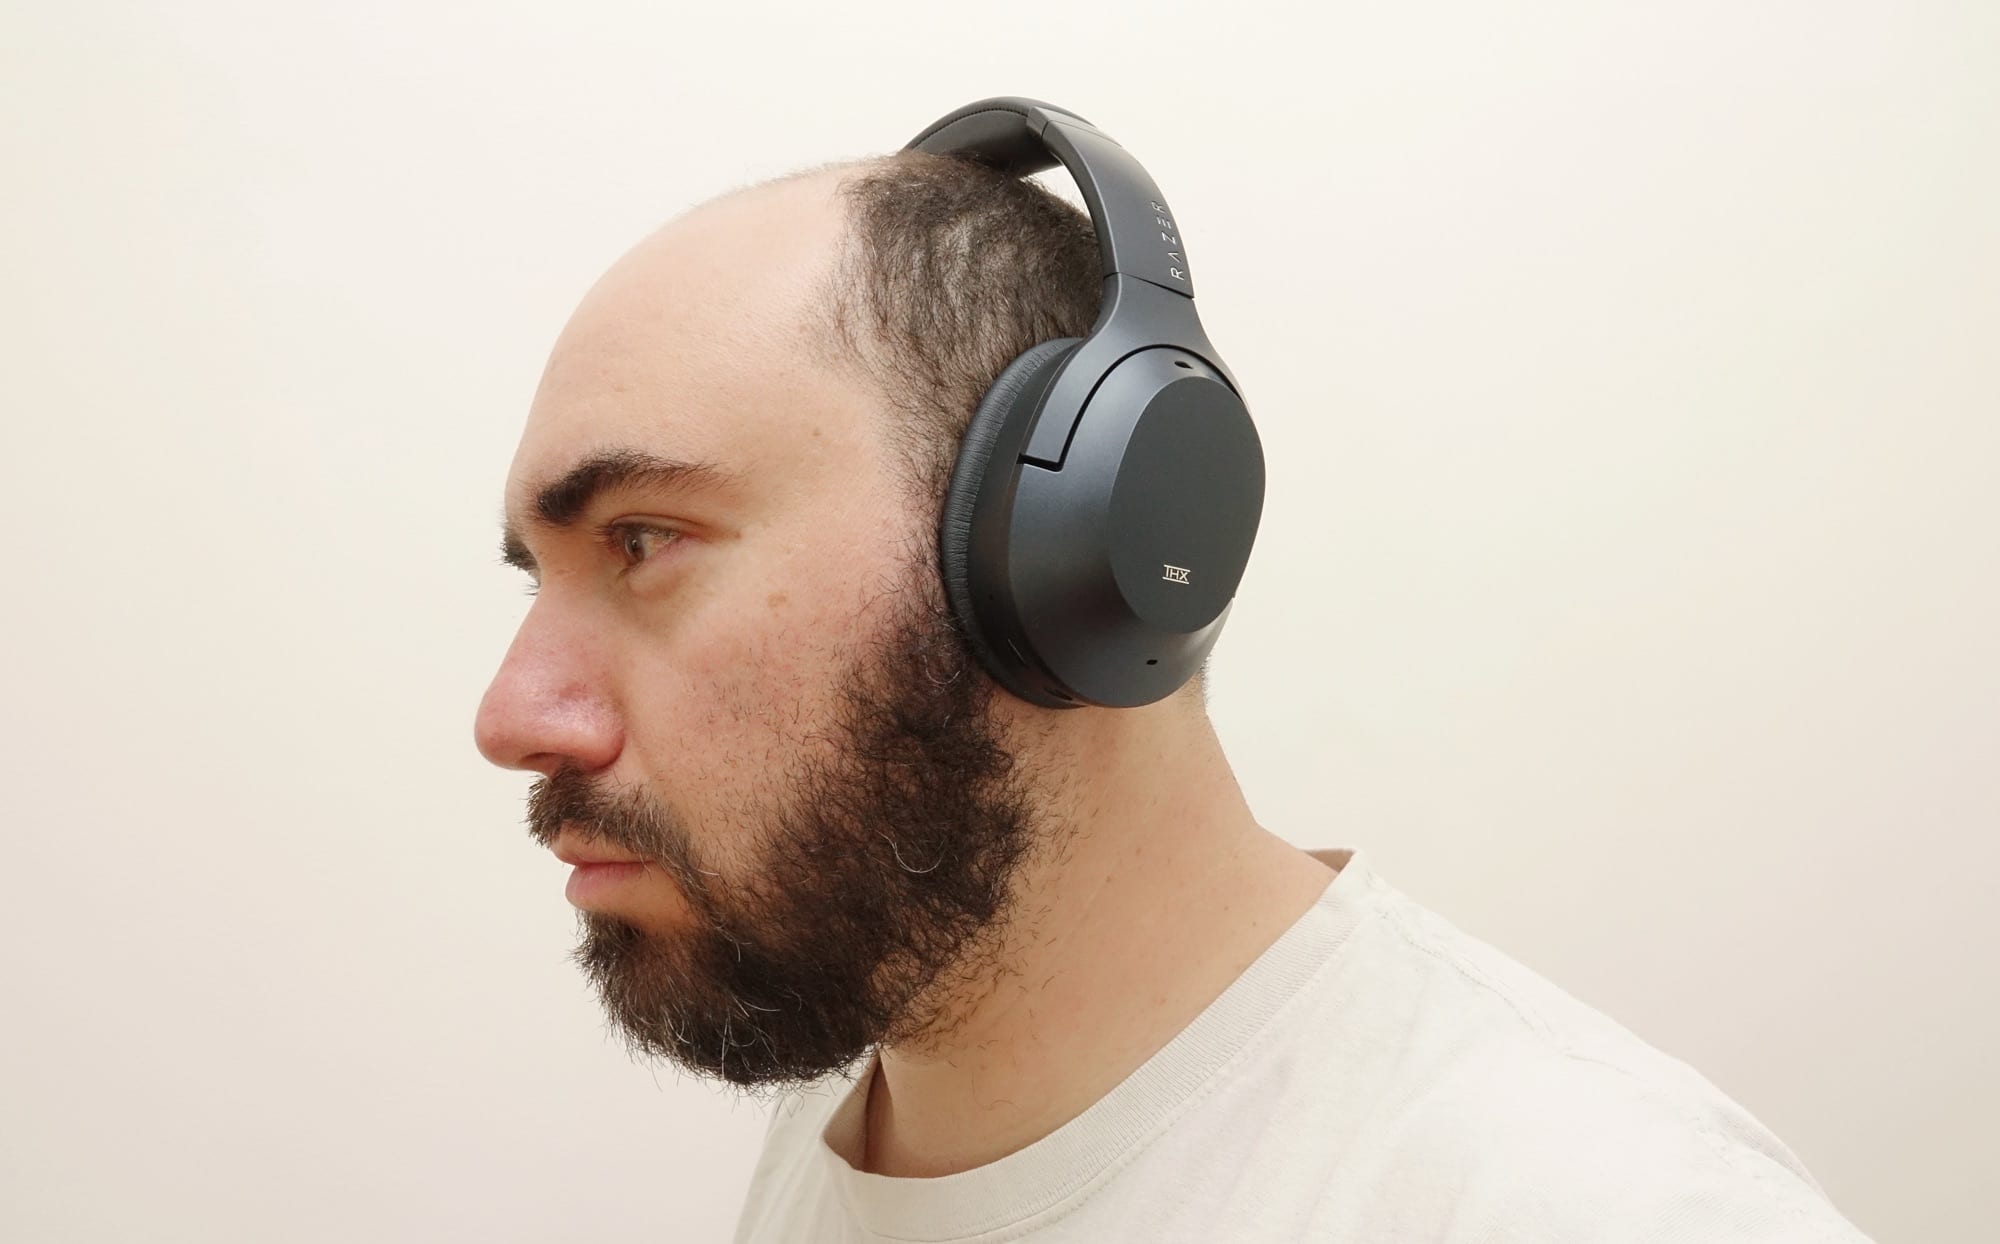 Trying out the Razer Opus headphones